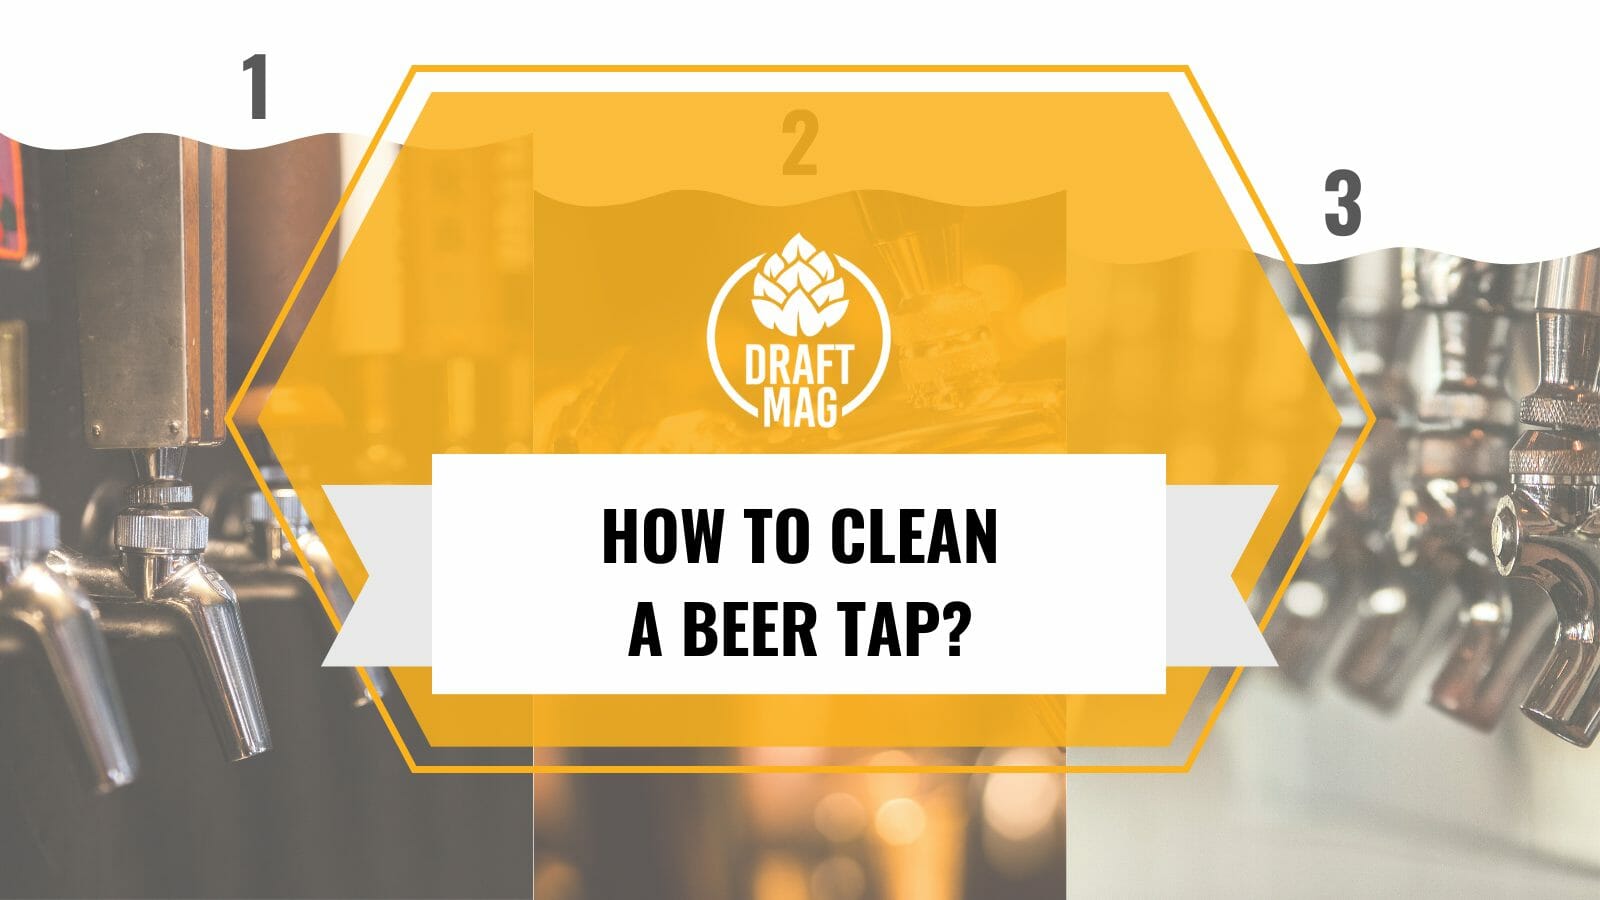 How to clean a beer tap